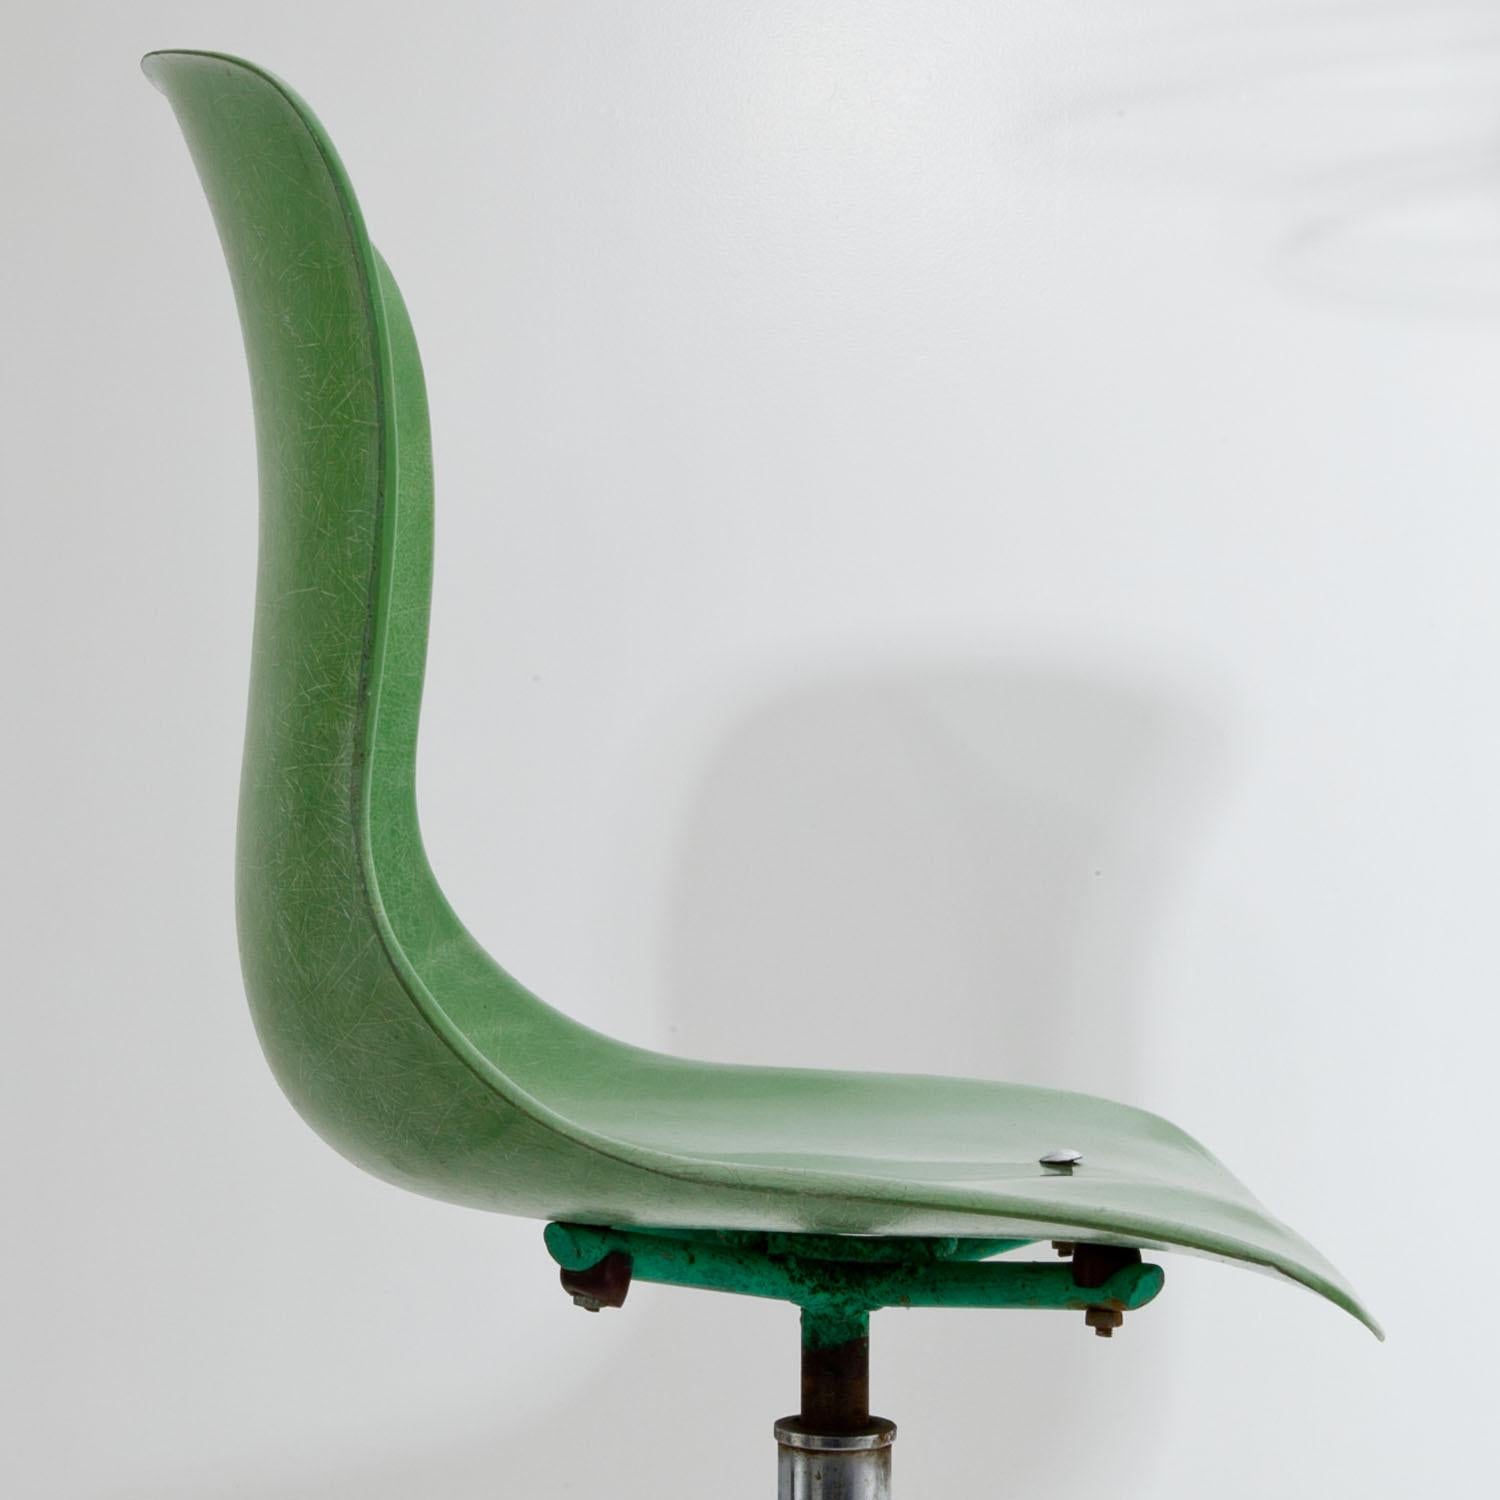 Pair of bar stools with green seats and iron legs.